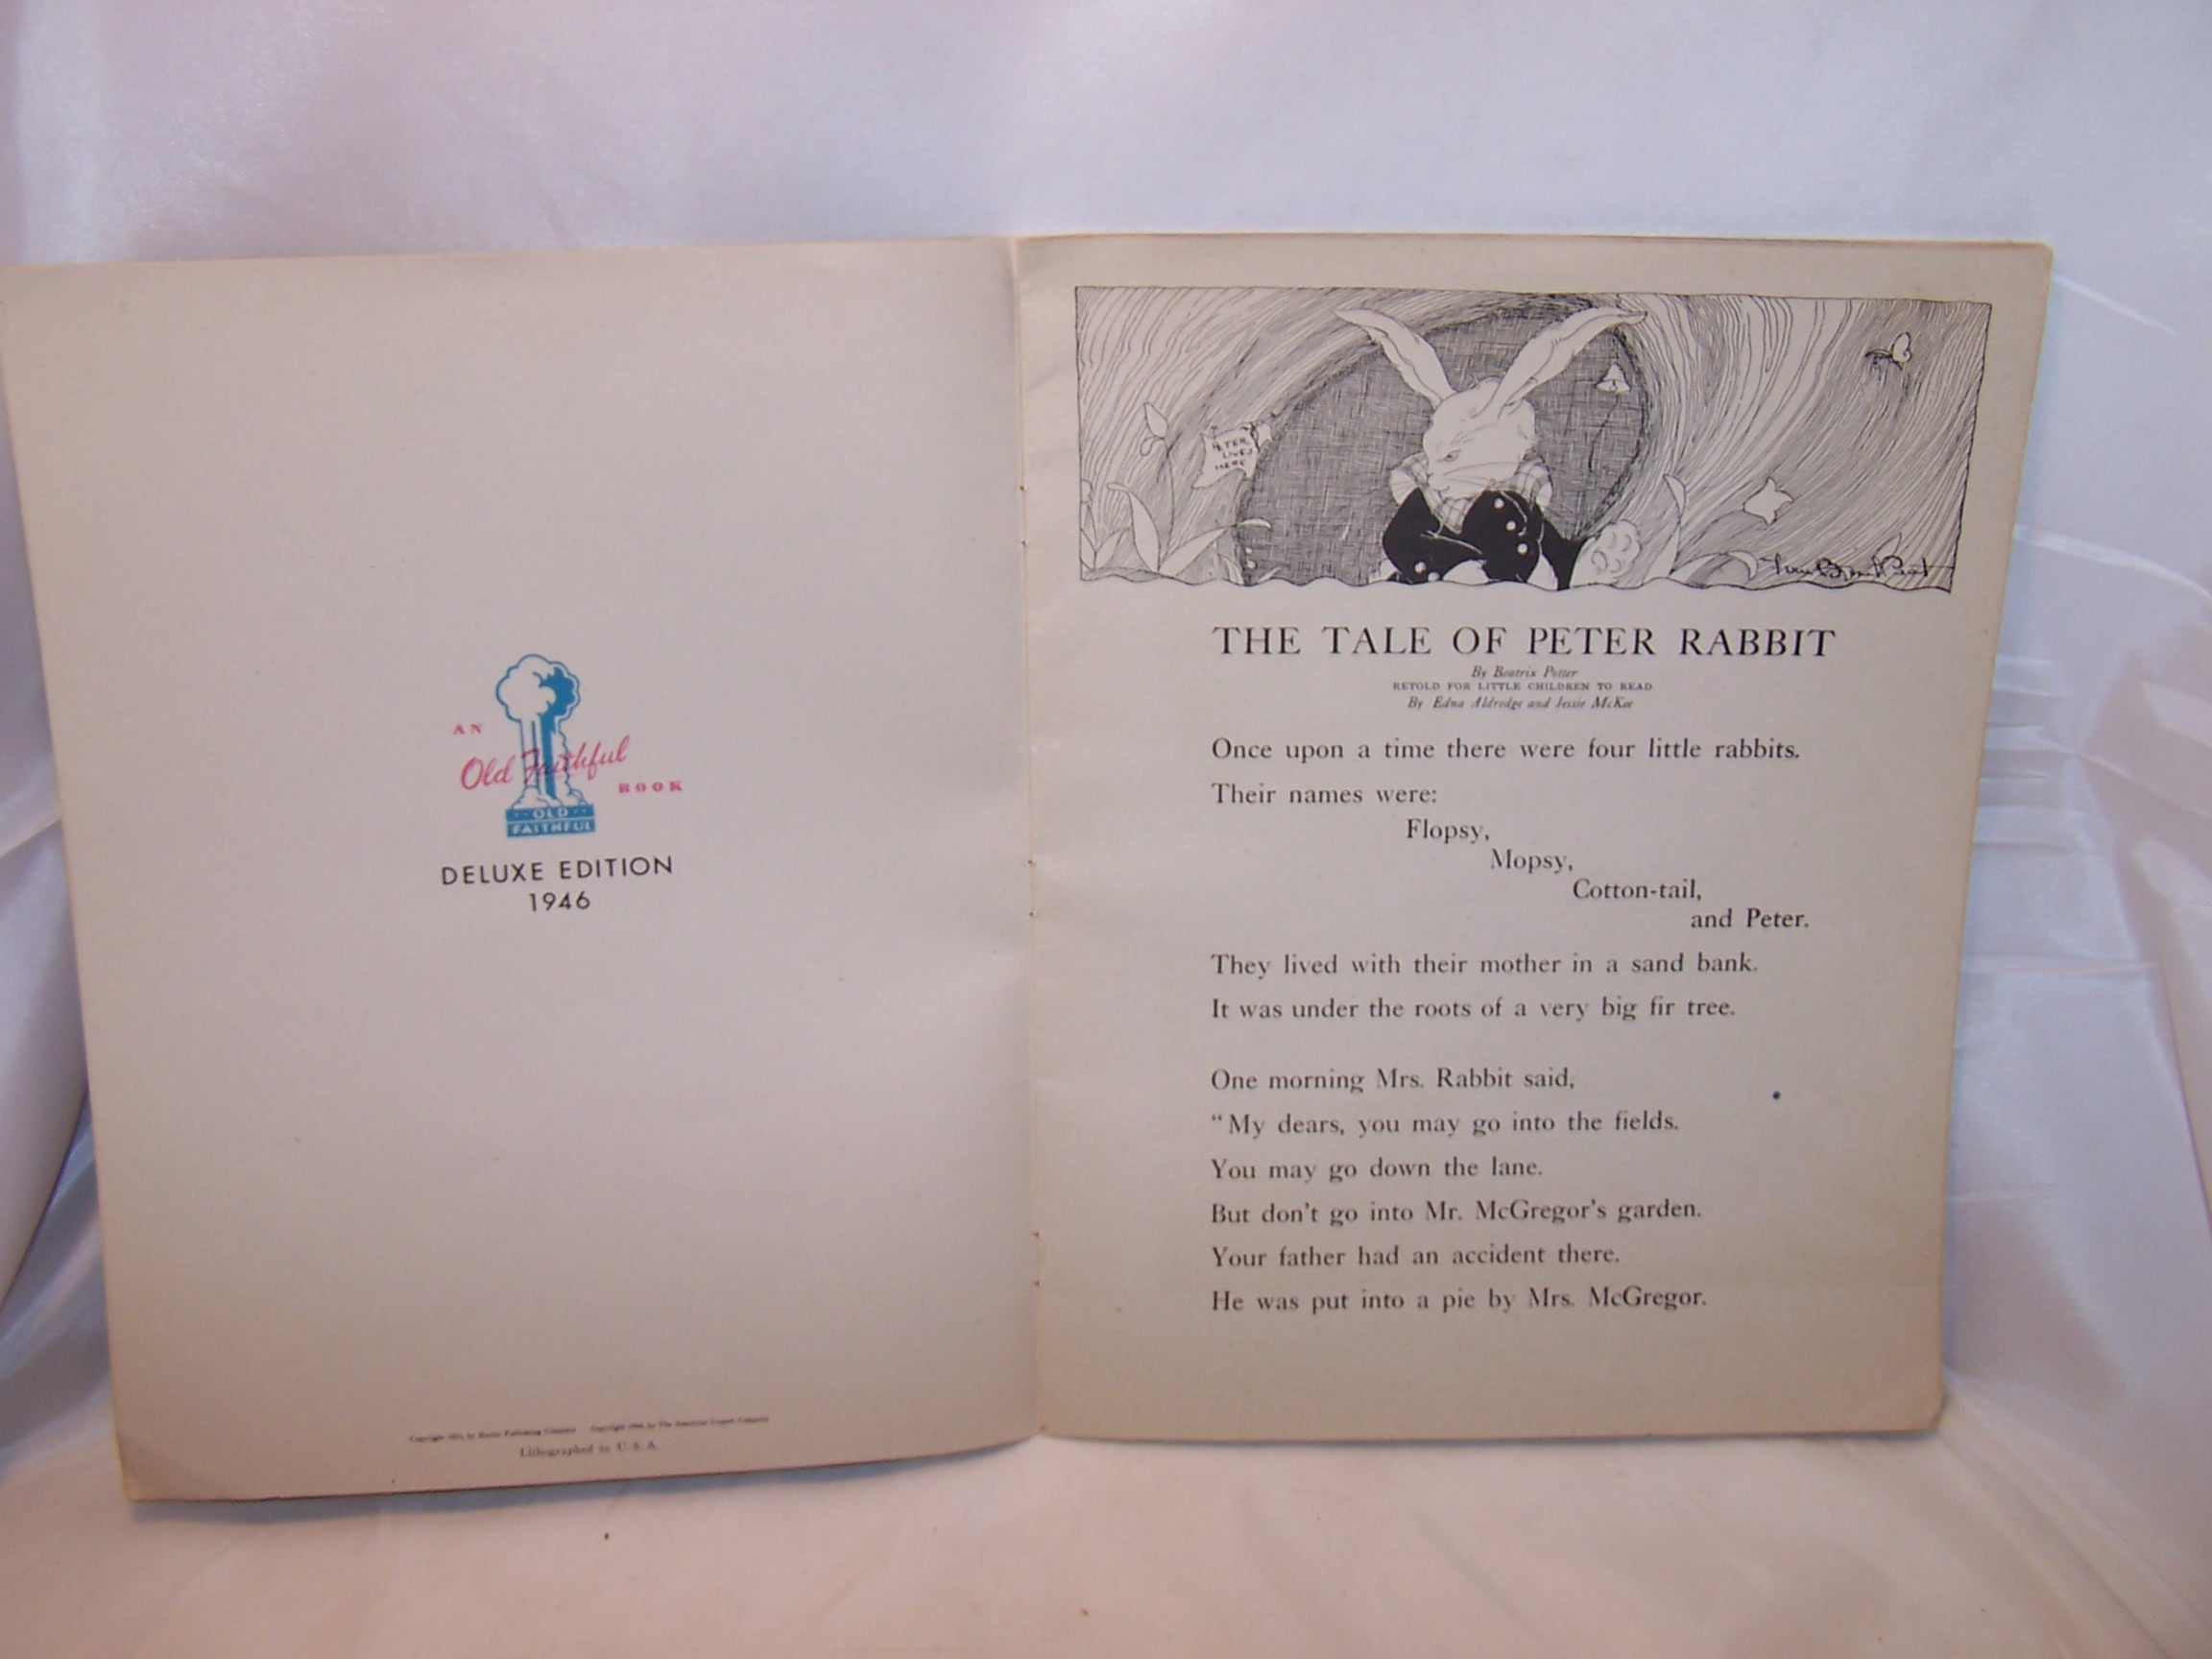 Image 2 of Peter Rabbit Book, Storybook, 1946, Aldredge and McKee, Prang Company Publishers